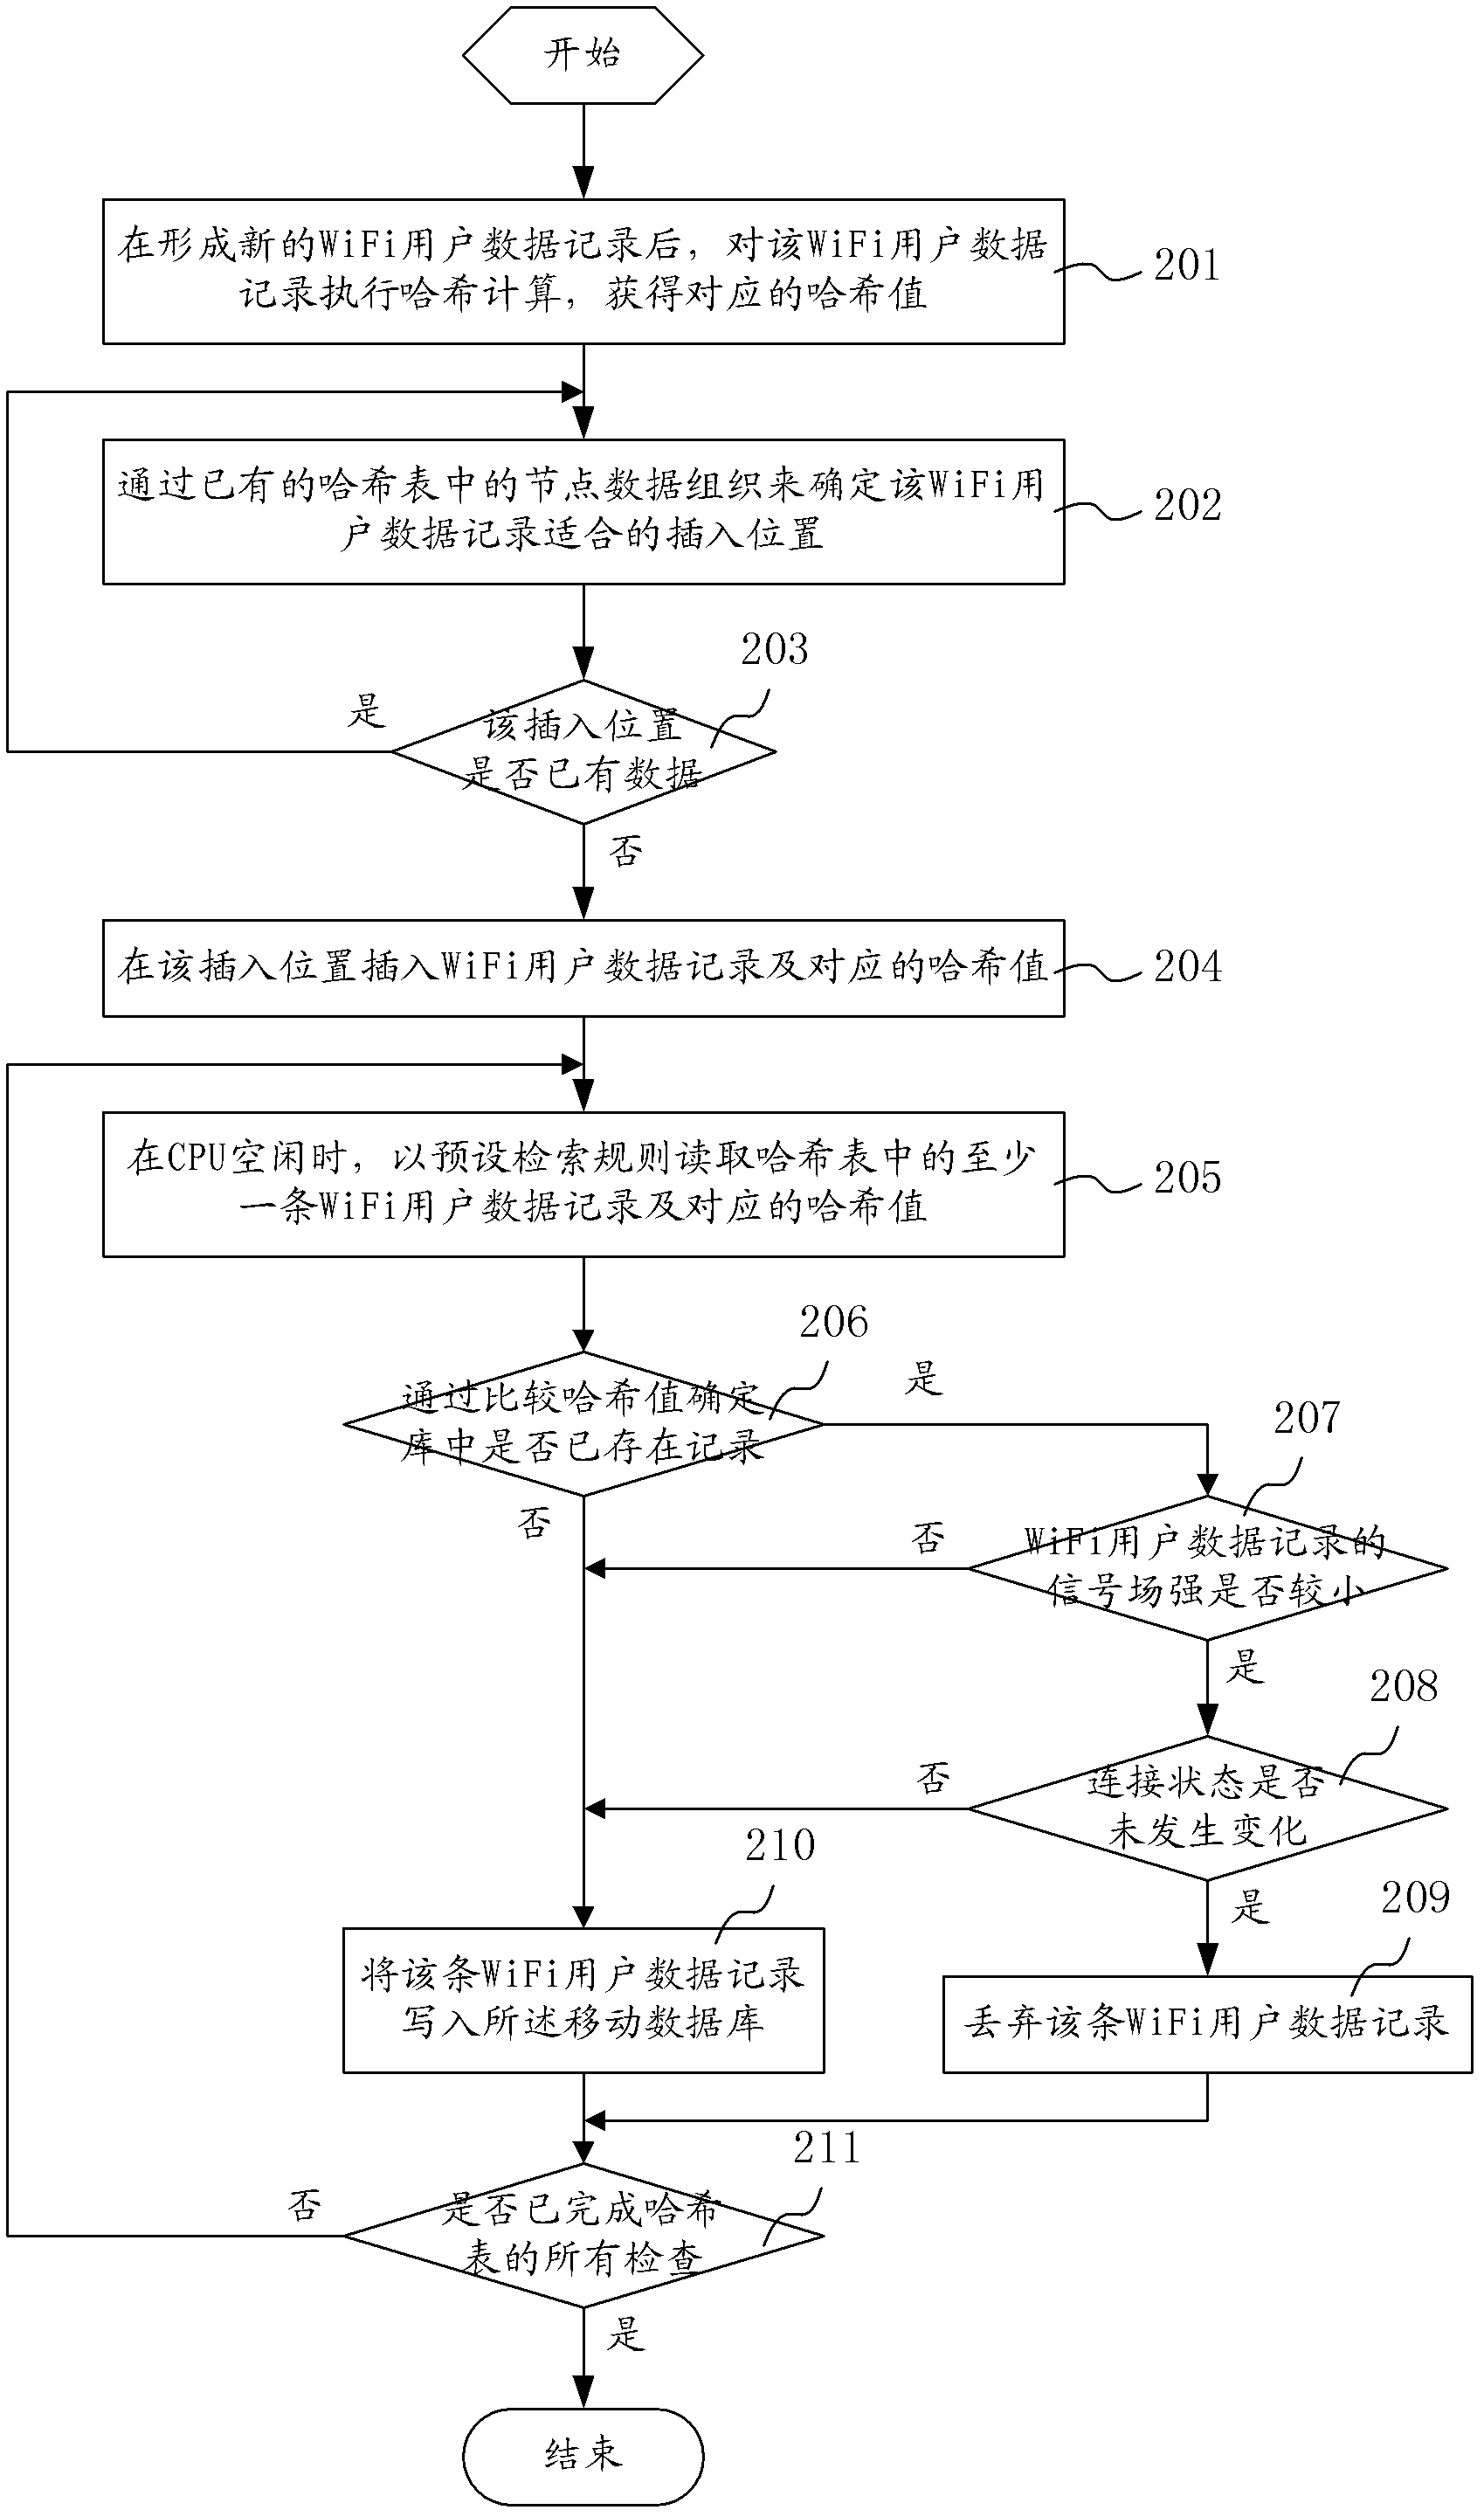 Method and system for positioning WiFi (wireless fidelity) application focused areas